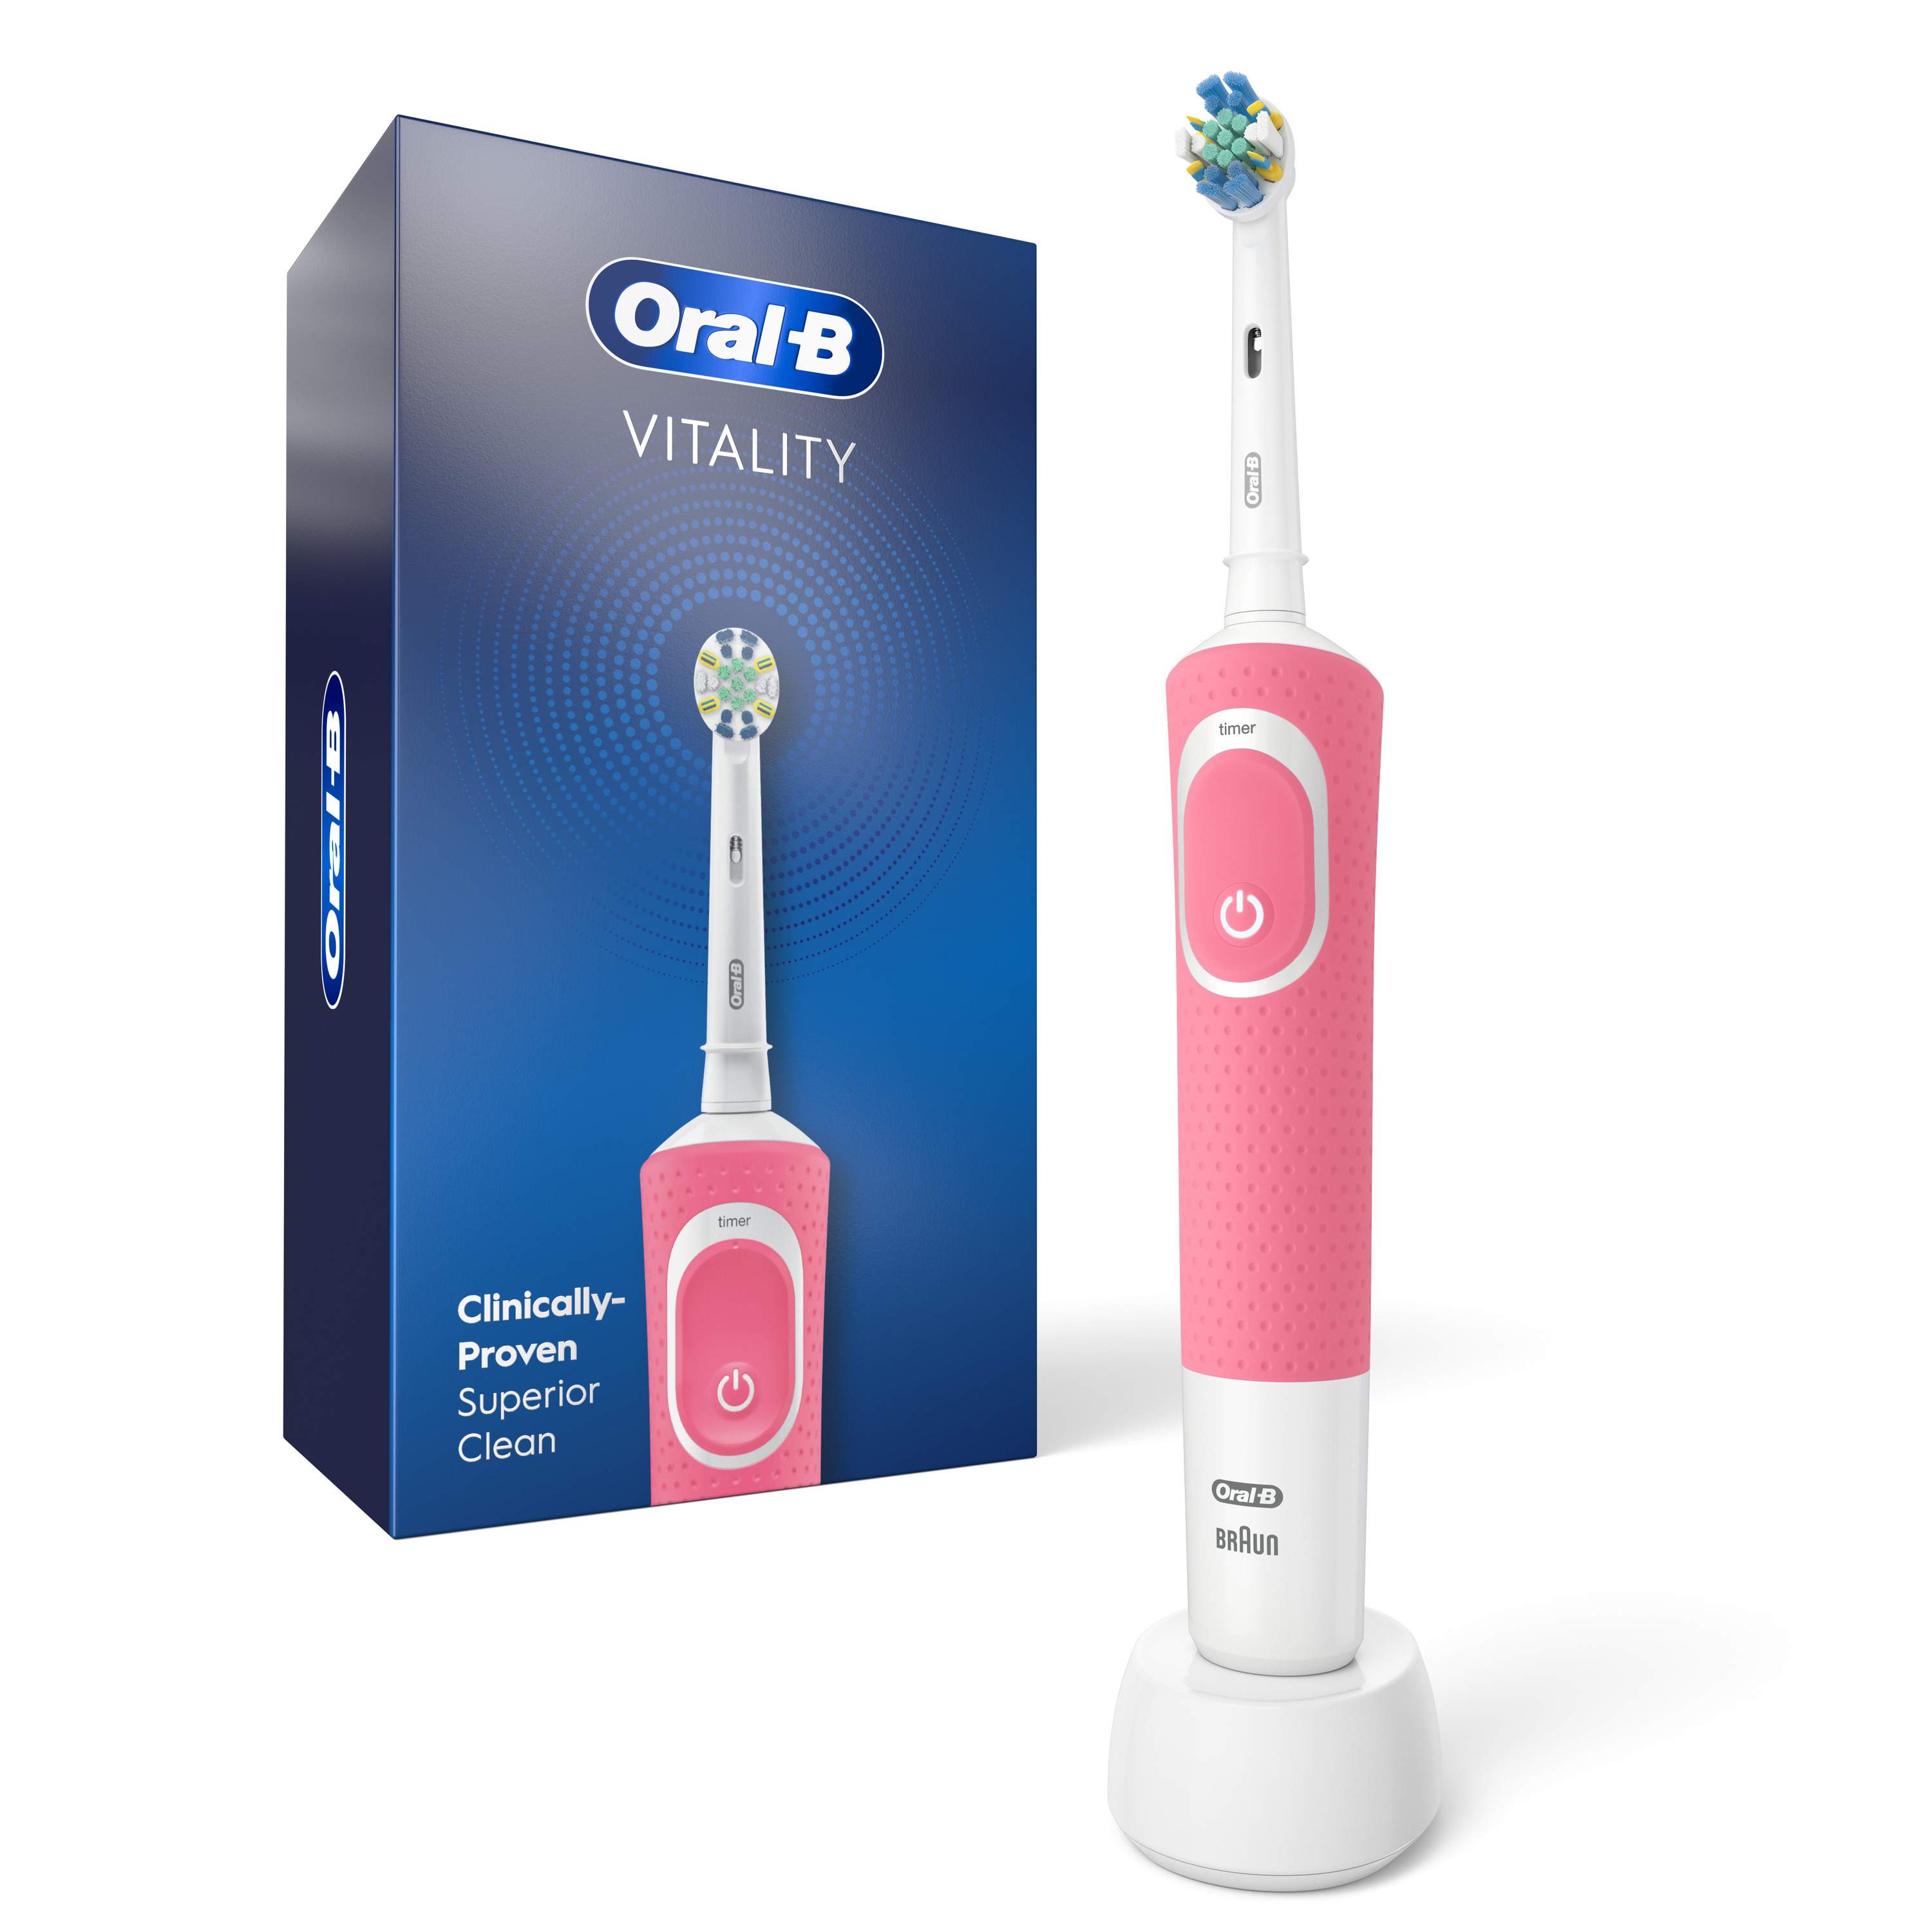 Oral-B Vitality Flossaction Rechargeable Electric Toothbrush, Pink, for Adults & Children 3+ - image 1 of 8